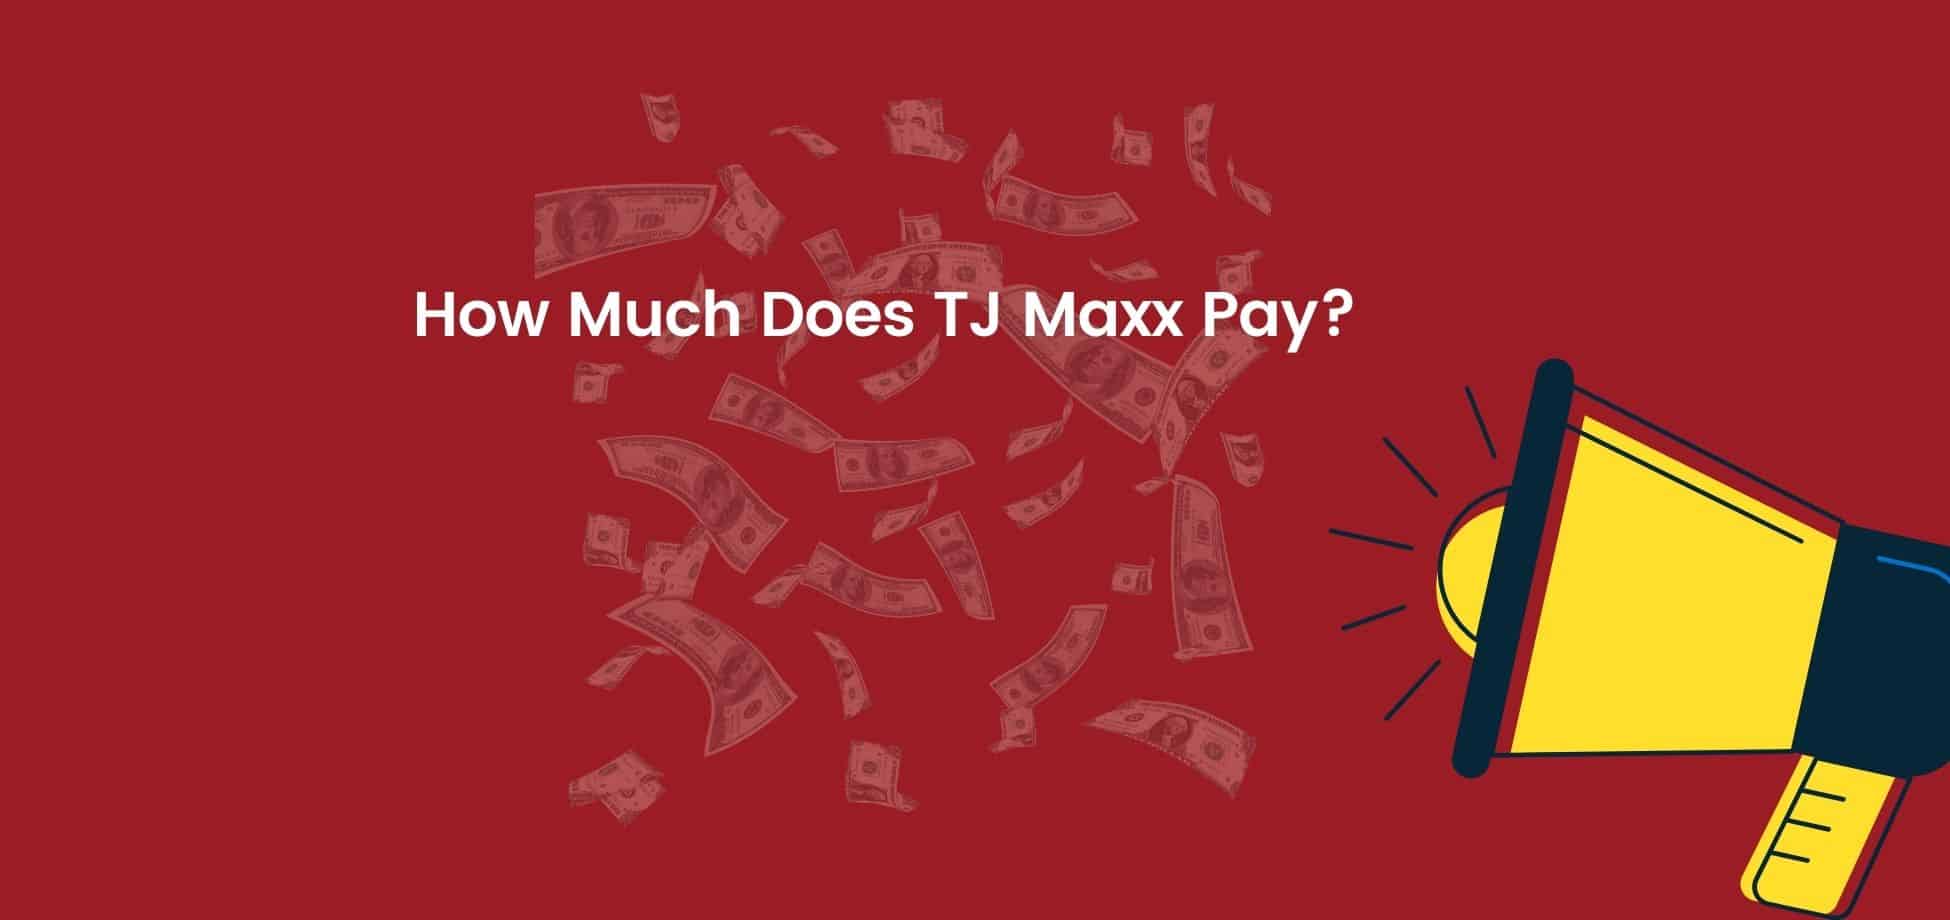 How much does TJ Maxx pay?